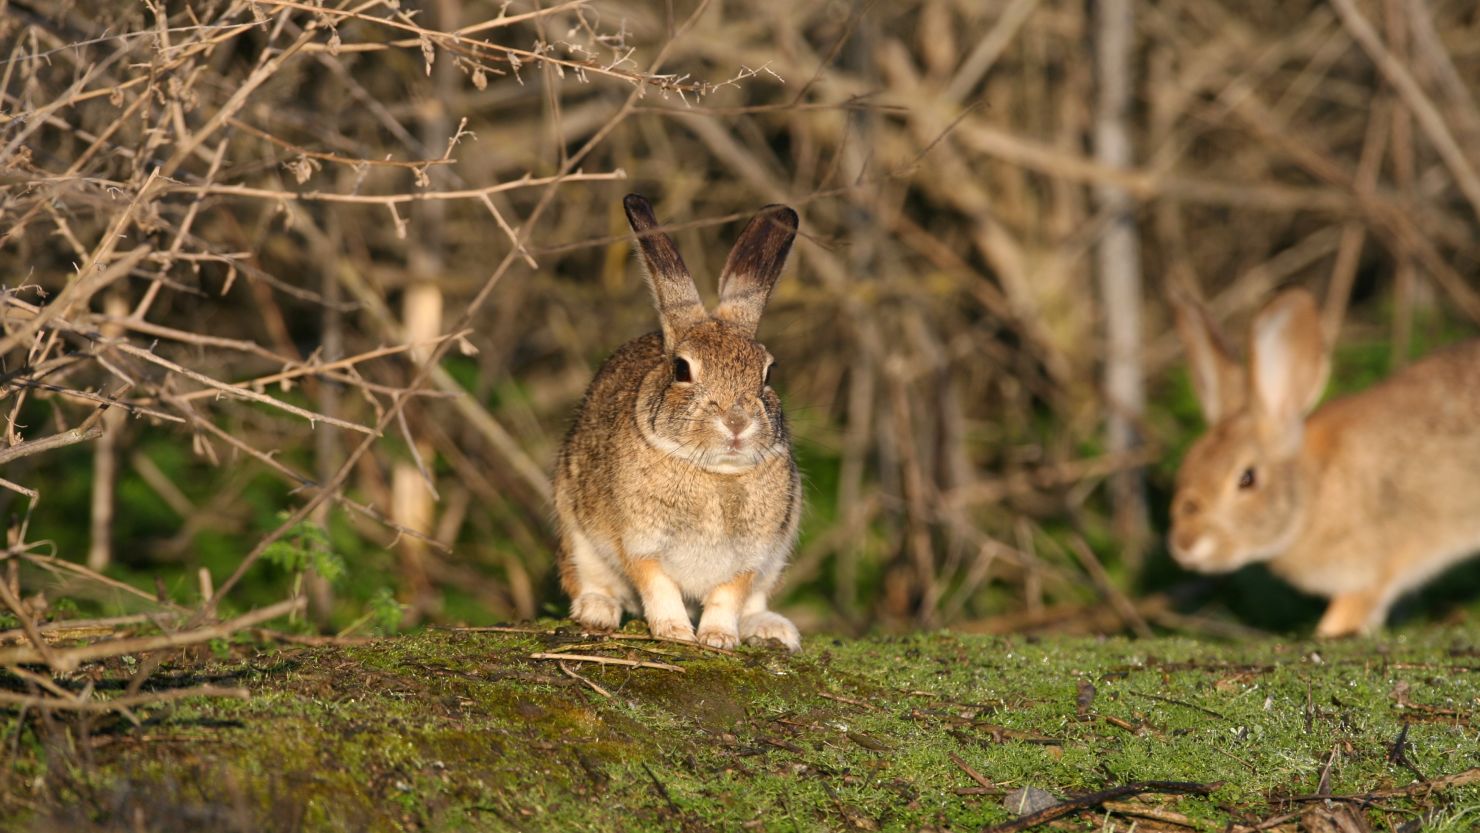 The lethal Rabbit Hemorrhagic Disease virus type 2 has worked its way through much of the western US up to California, where it threatens endangered species like these Riparian brush rabbit. 